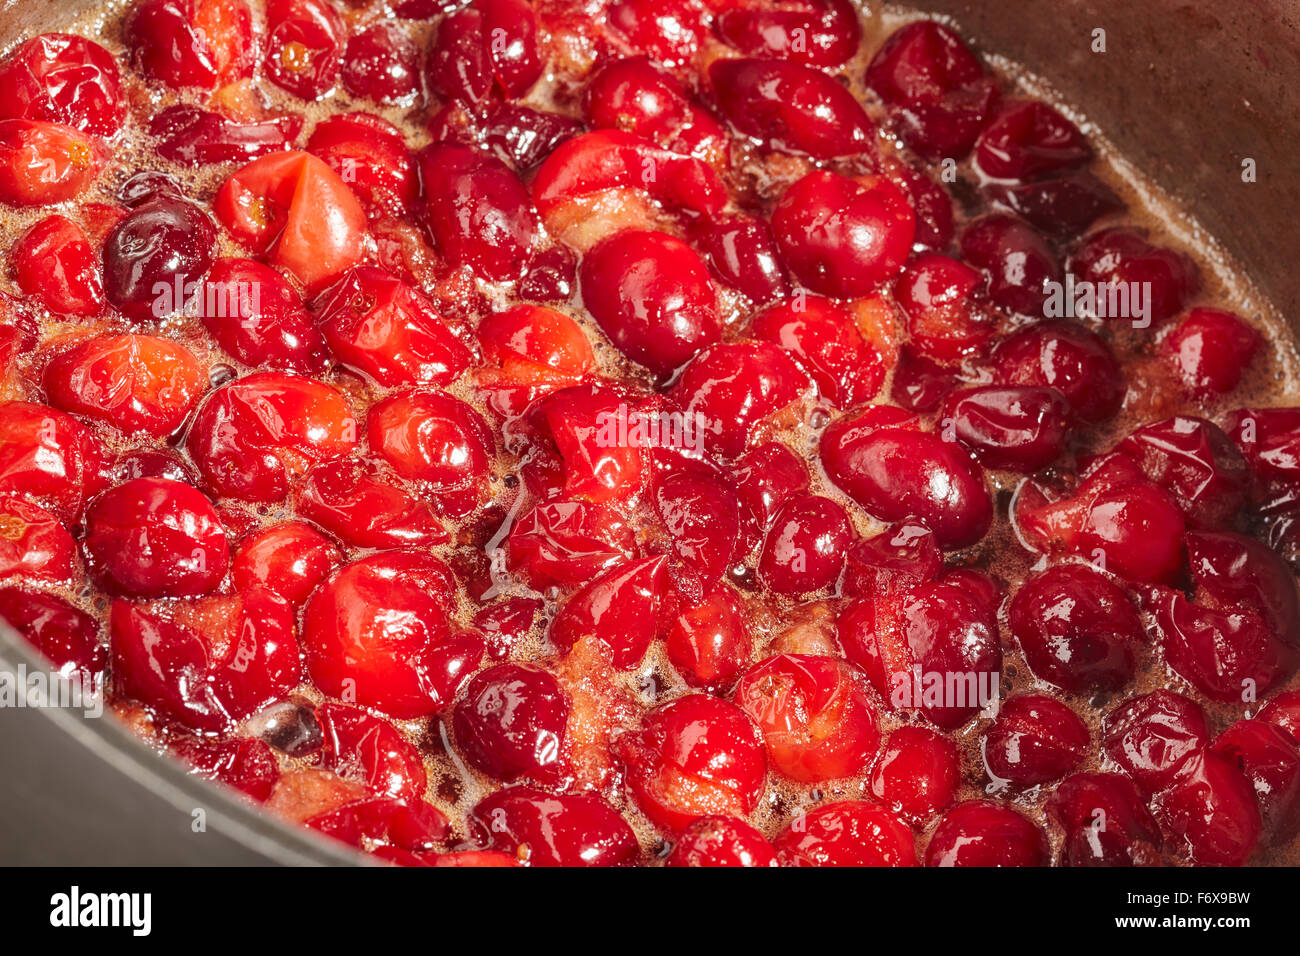 Whole cranberry sauce cooking Stock Photo